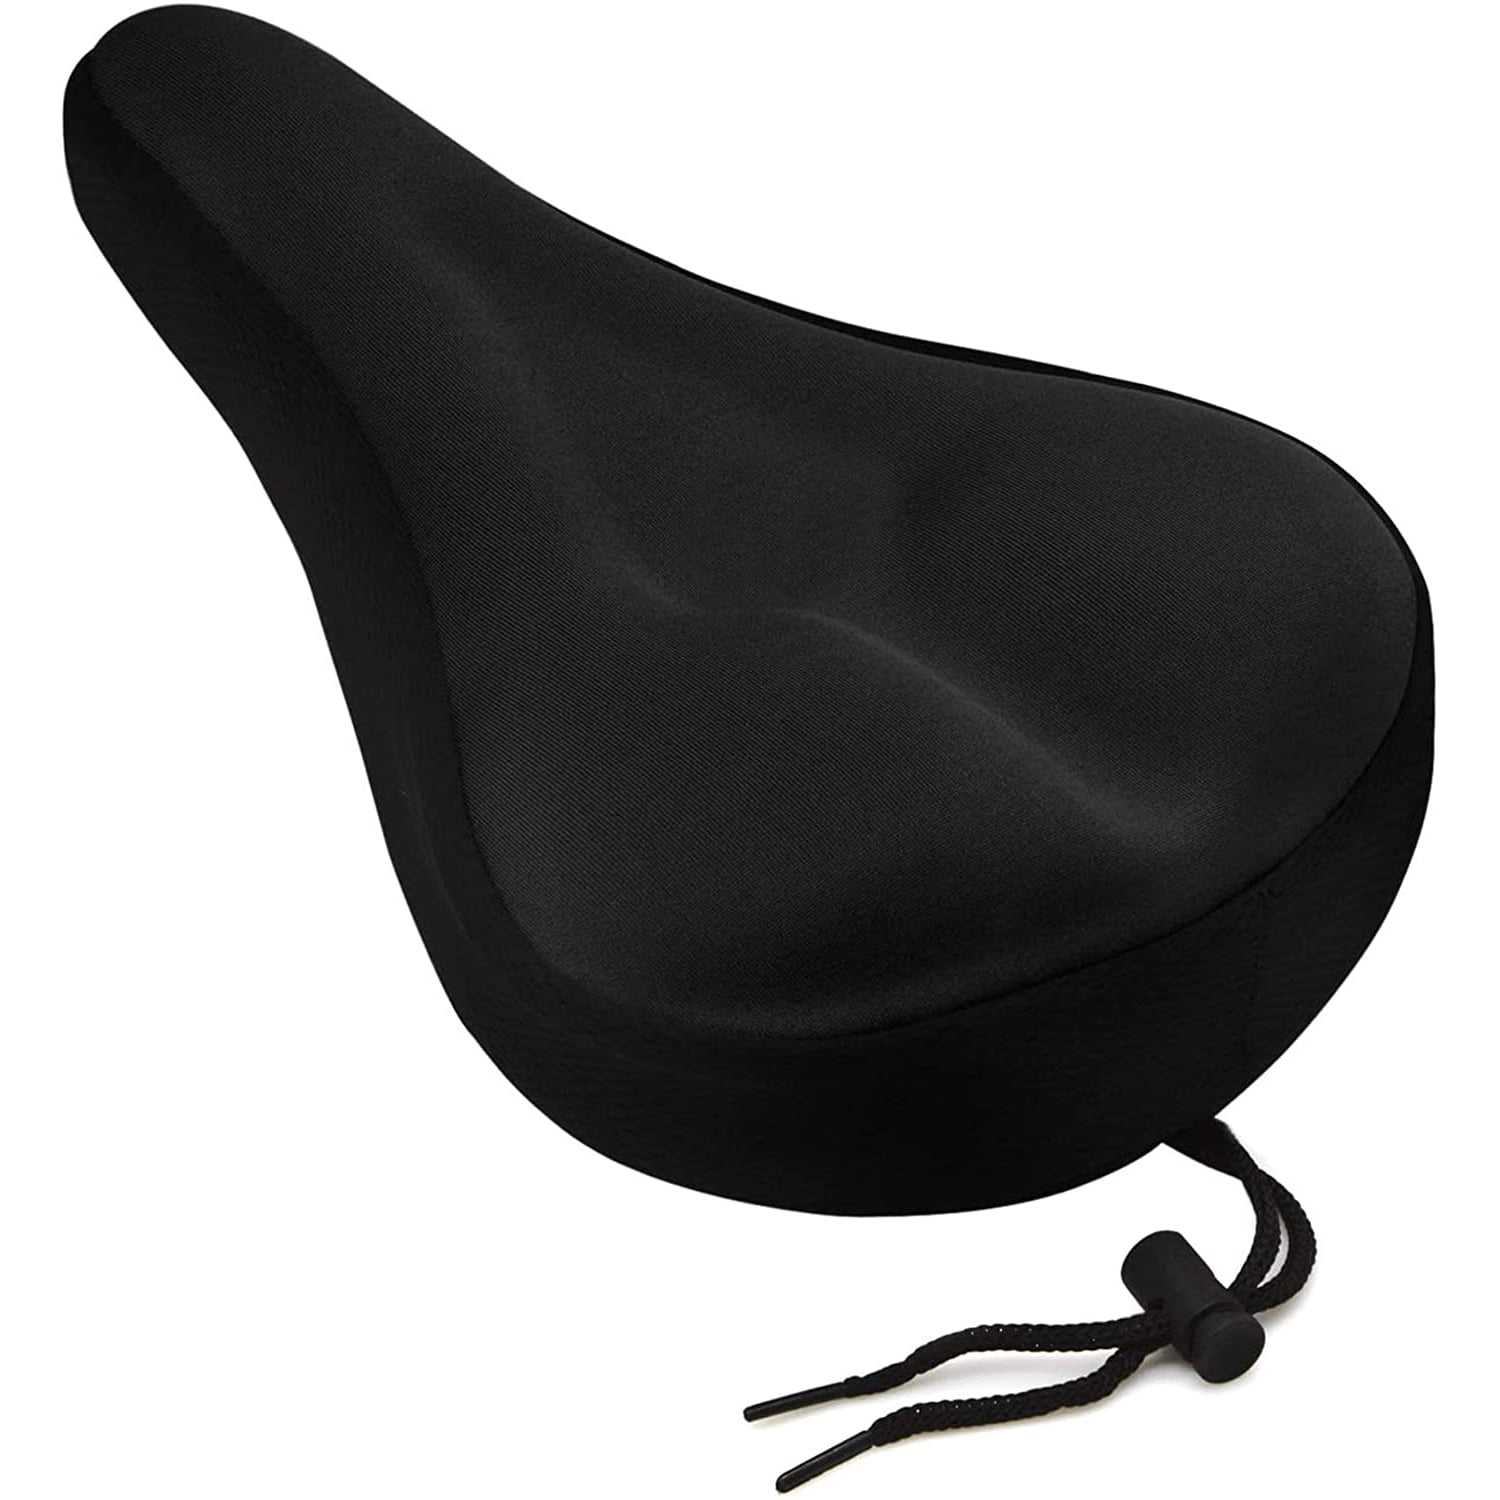 Bike Saddle Cover Unifortable Siliconeandmemory Foam Padded Soft Gel Relief Bicycle Seat